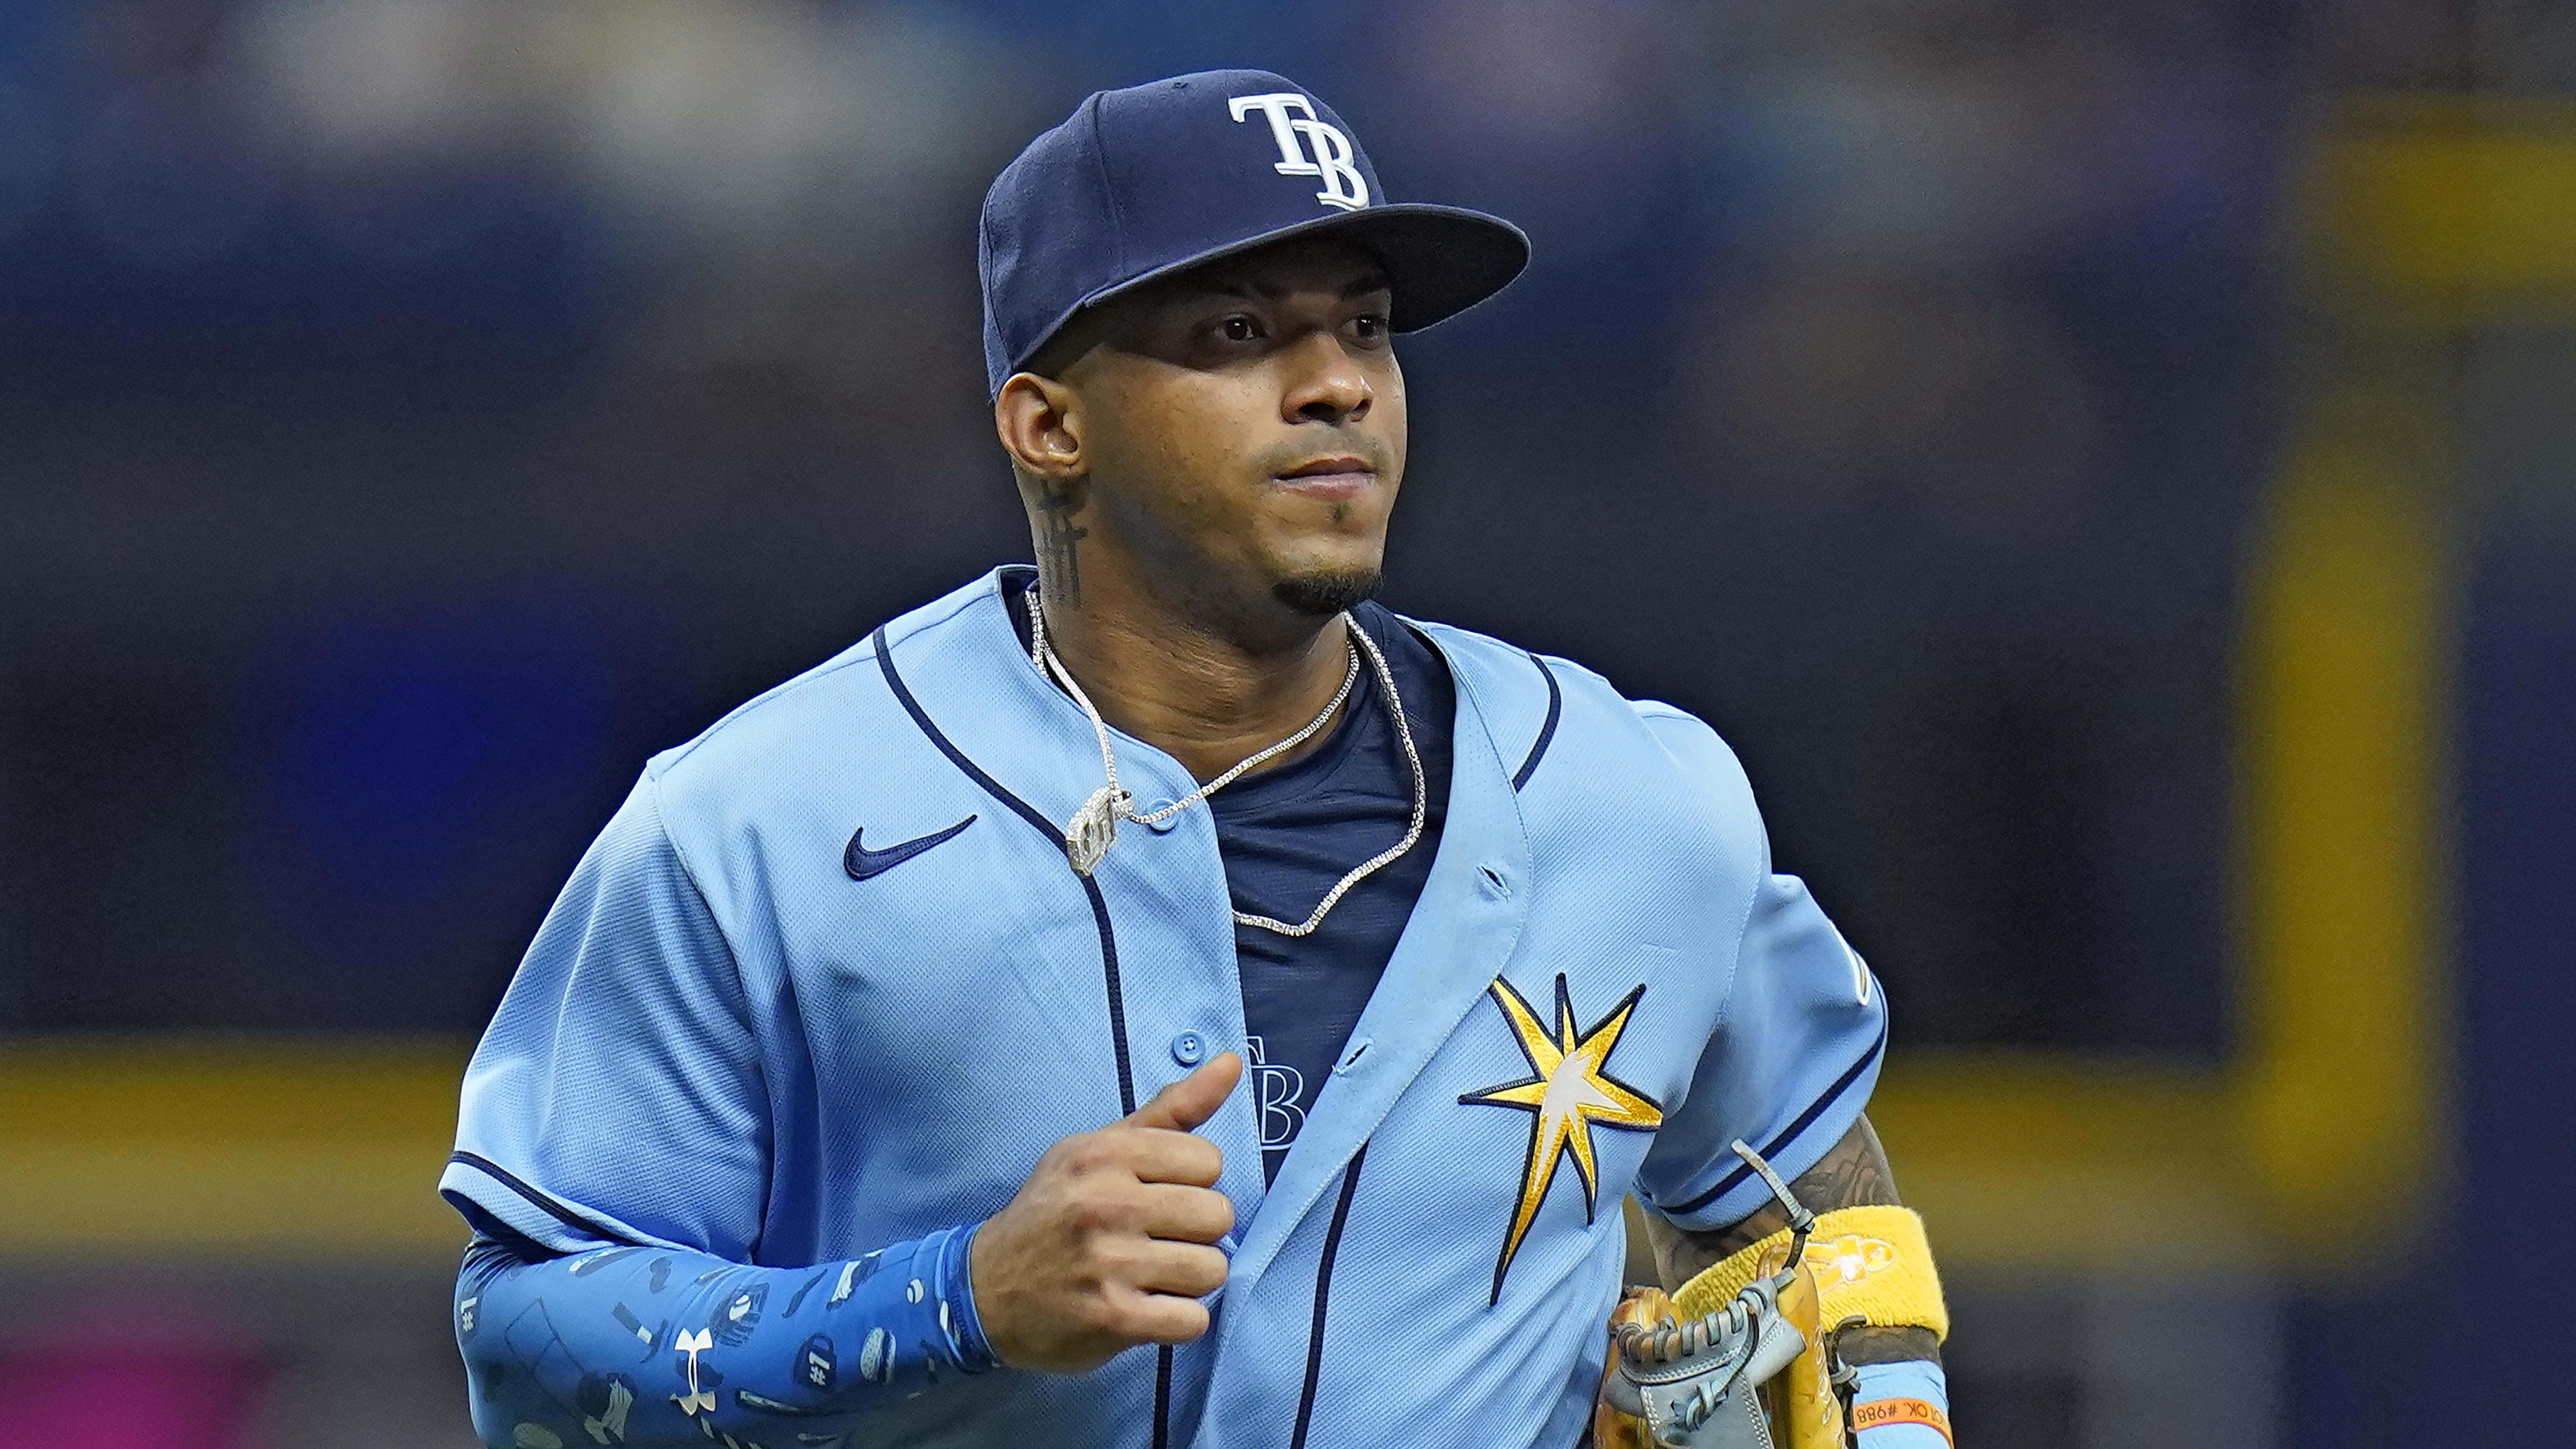 MLB places Wander Franco on administrative leave; Rays support